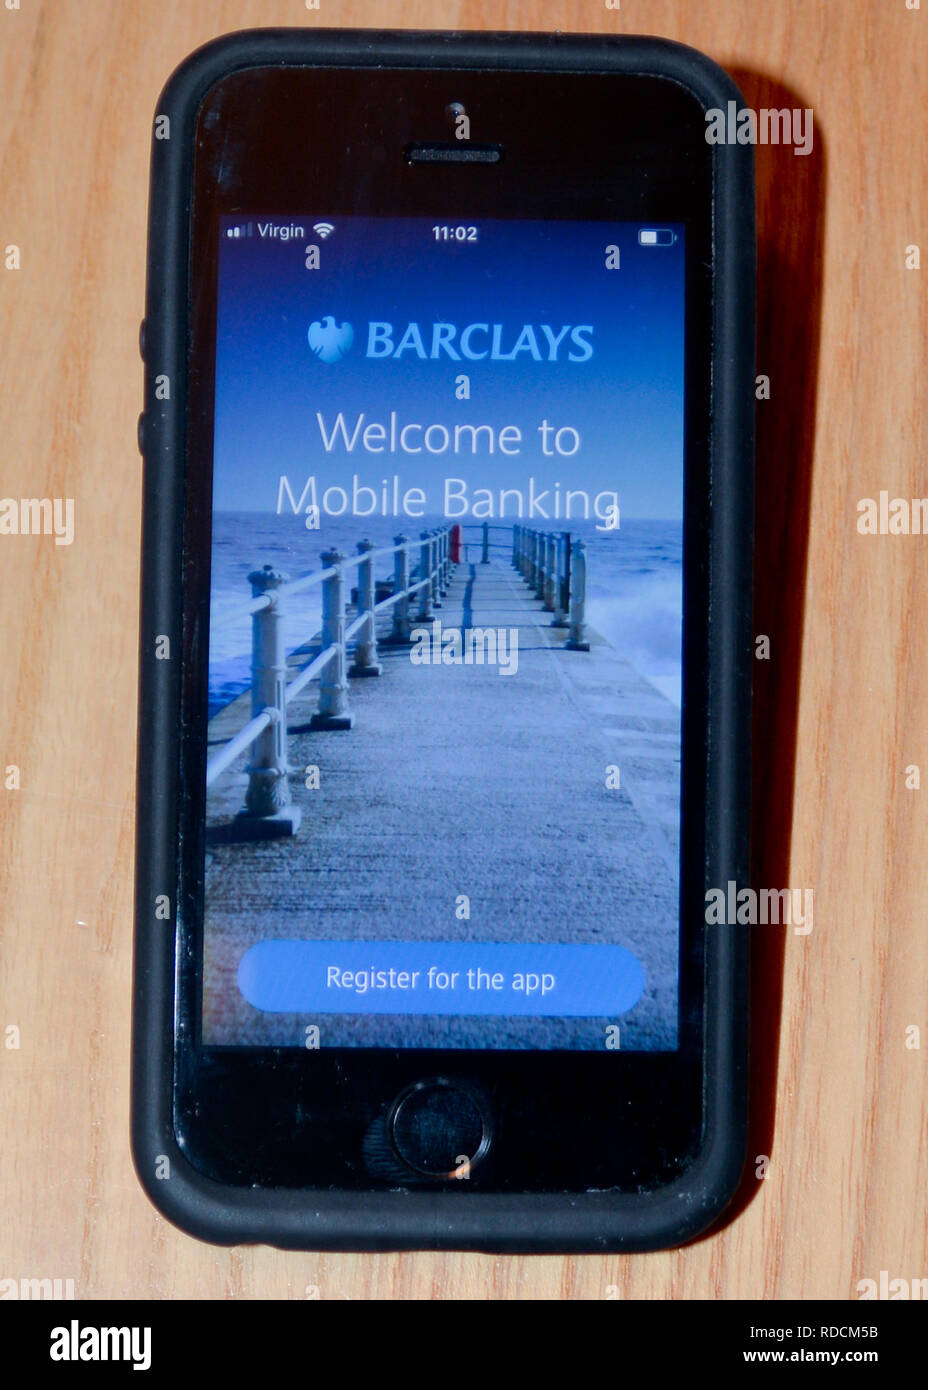 Barclays bank application on smart phone Stock Photo